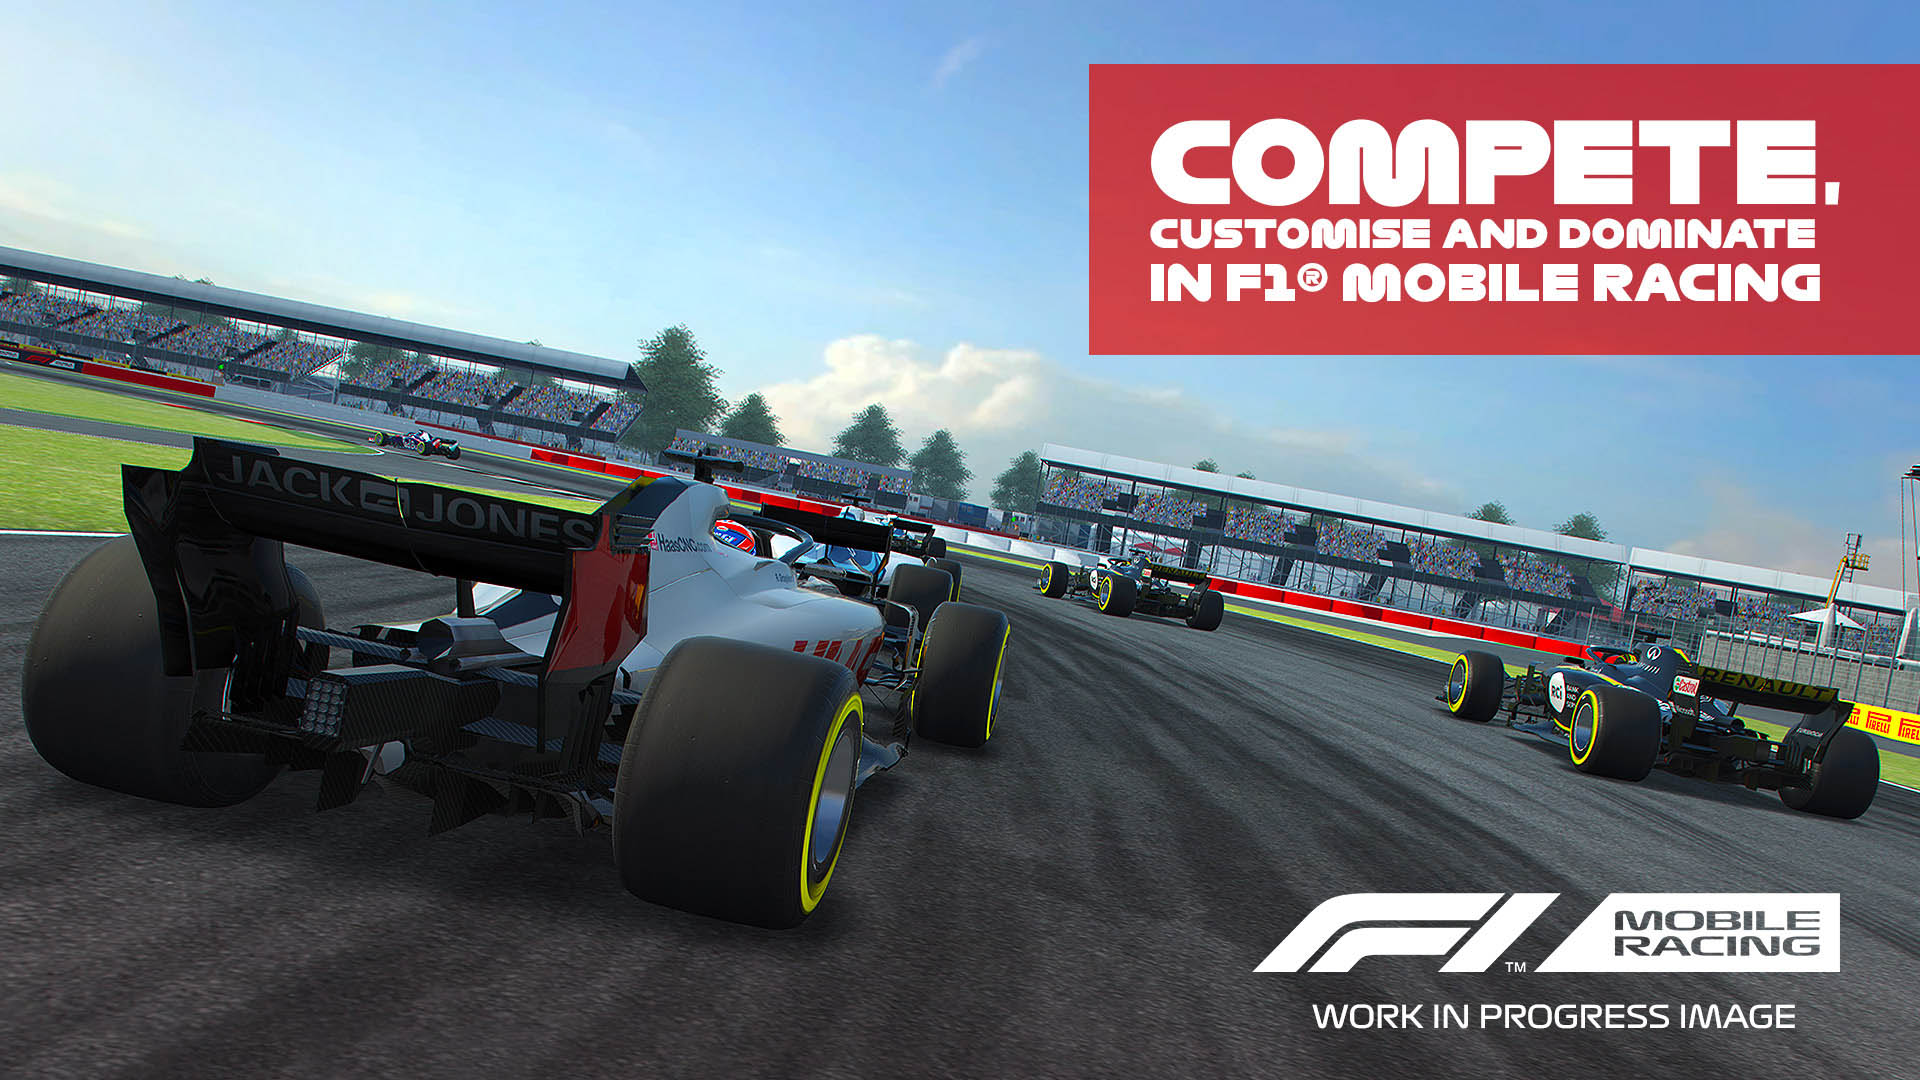 F1 Mobile Racing Game Packs Lots Of Action Into Your Phone | Carscoops